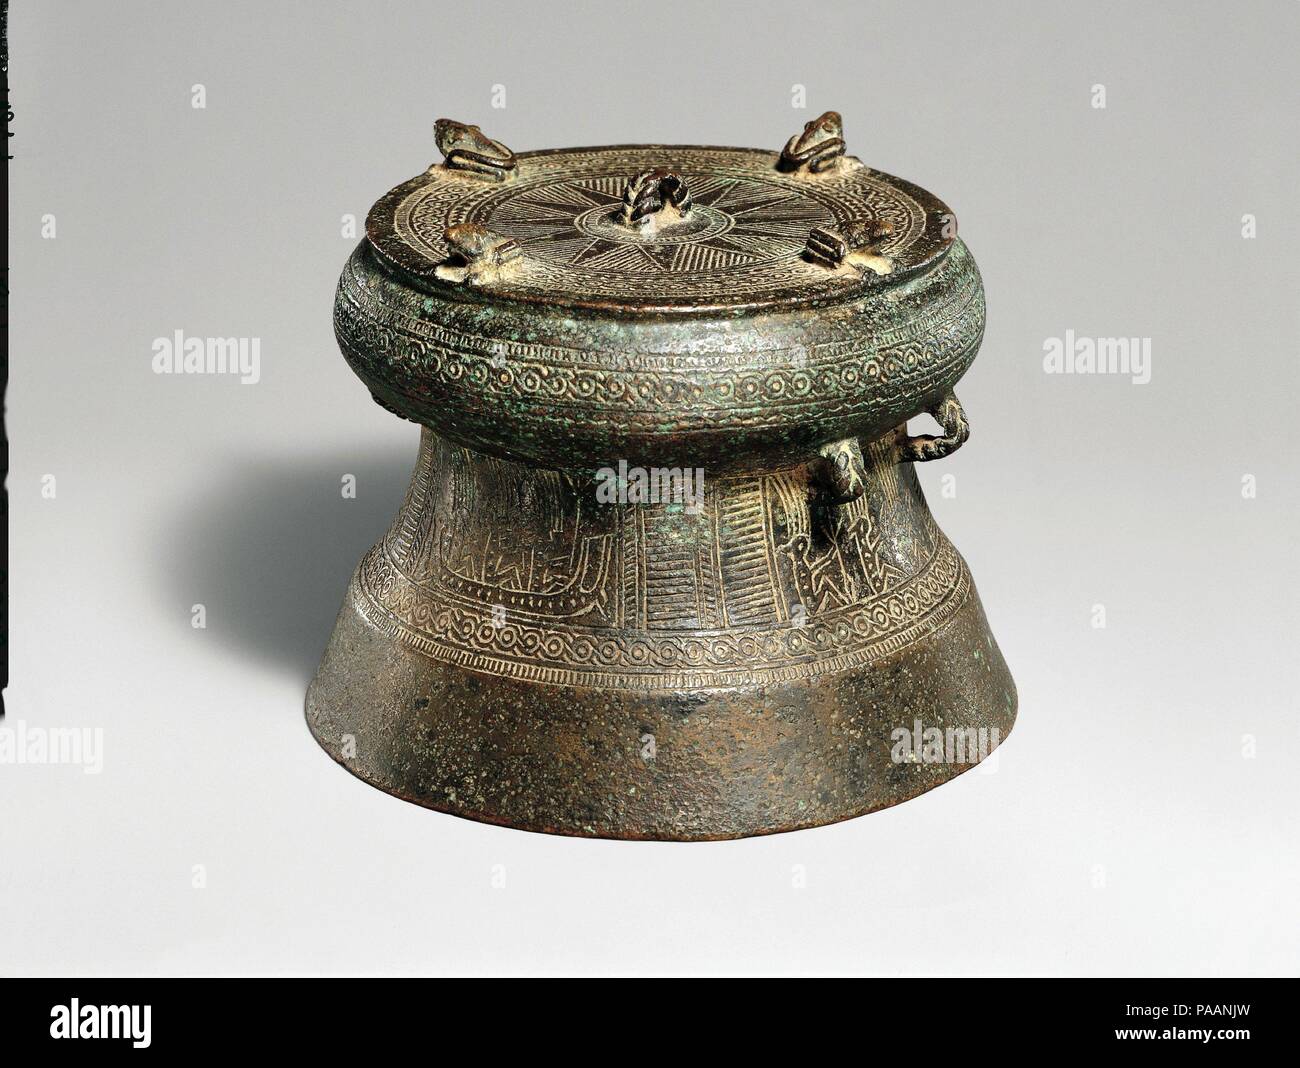 Miniature Drum with Four Frogs. Culture: Vietnam. Dimensions: H. 4 in. (10.2 cm). Date: ca. 500 B.C.-A.D. 300.  Ranging in height from a few inches to over six feet, up to four feet in diameter, and often of considerable weight, drums are the most widely dispersed products of the Dongson culture of northern Vietnam. Examples produced in Vietnam, in addition to works made locally, have been found in south China and throughout mainland  and island Southeast Asia. The function of these drums, often found in burials, remains unclear. They may have been used in warfare, as political regalia,  or as Stock Photo